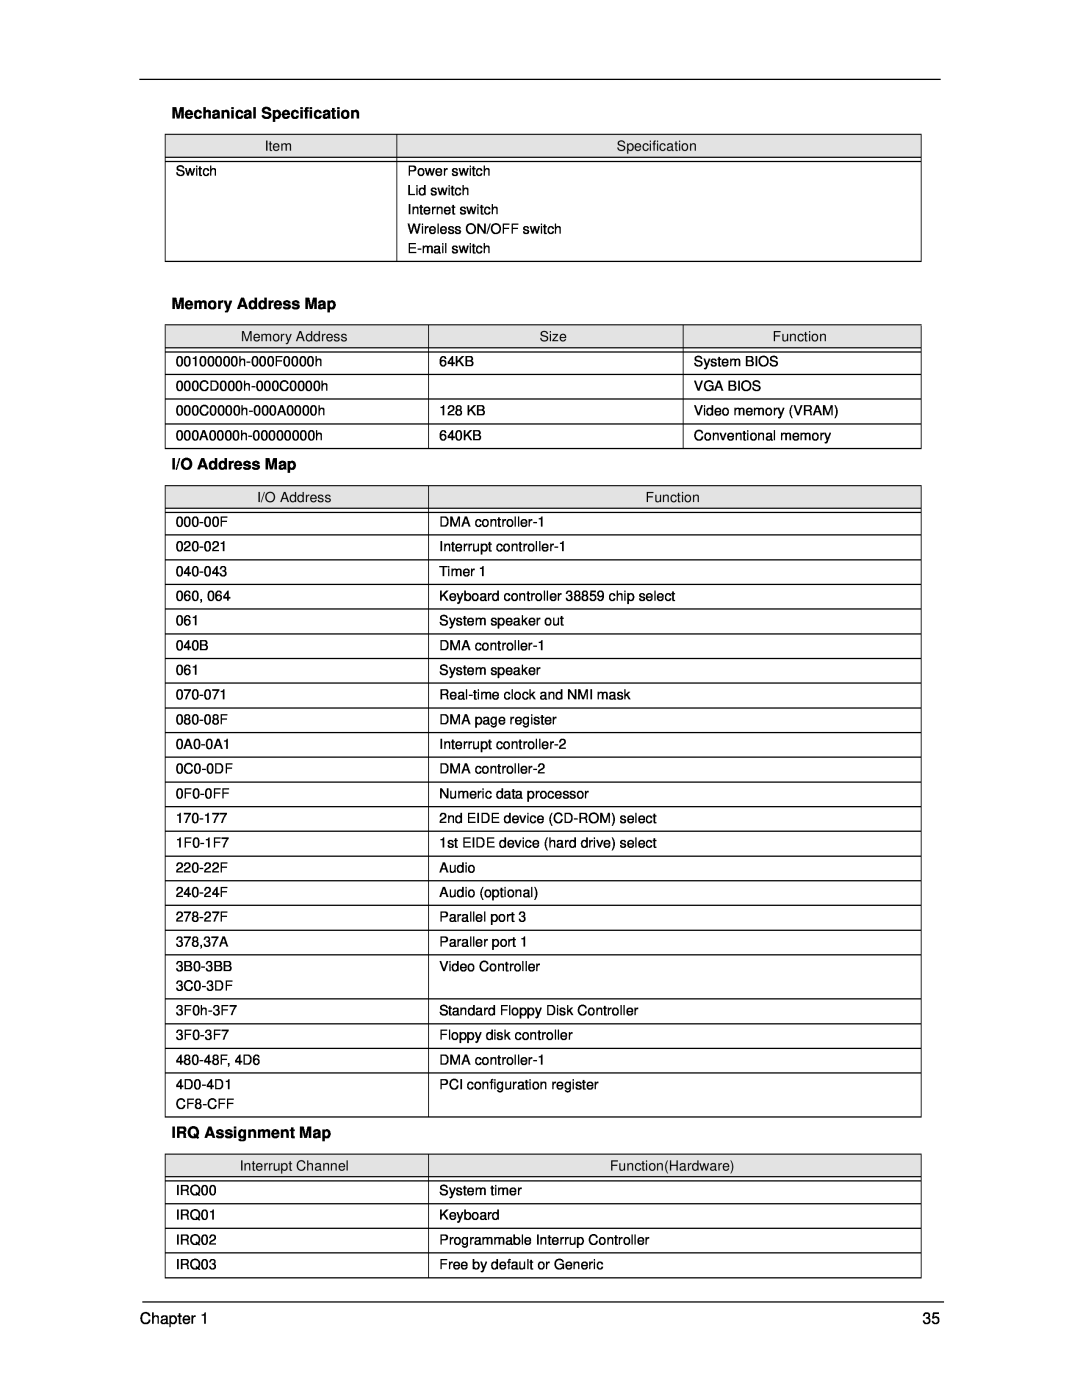 Acer 270 manual Mechanical Specification, Memory Address Map, I/O Address Map, IRQ Assignment Map 